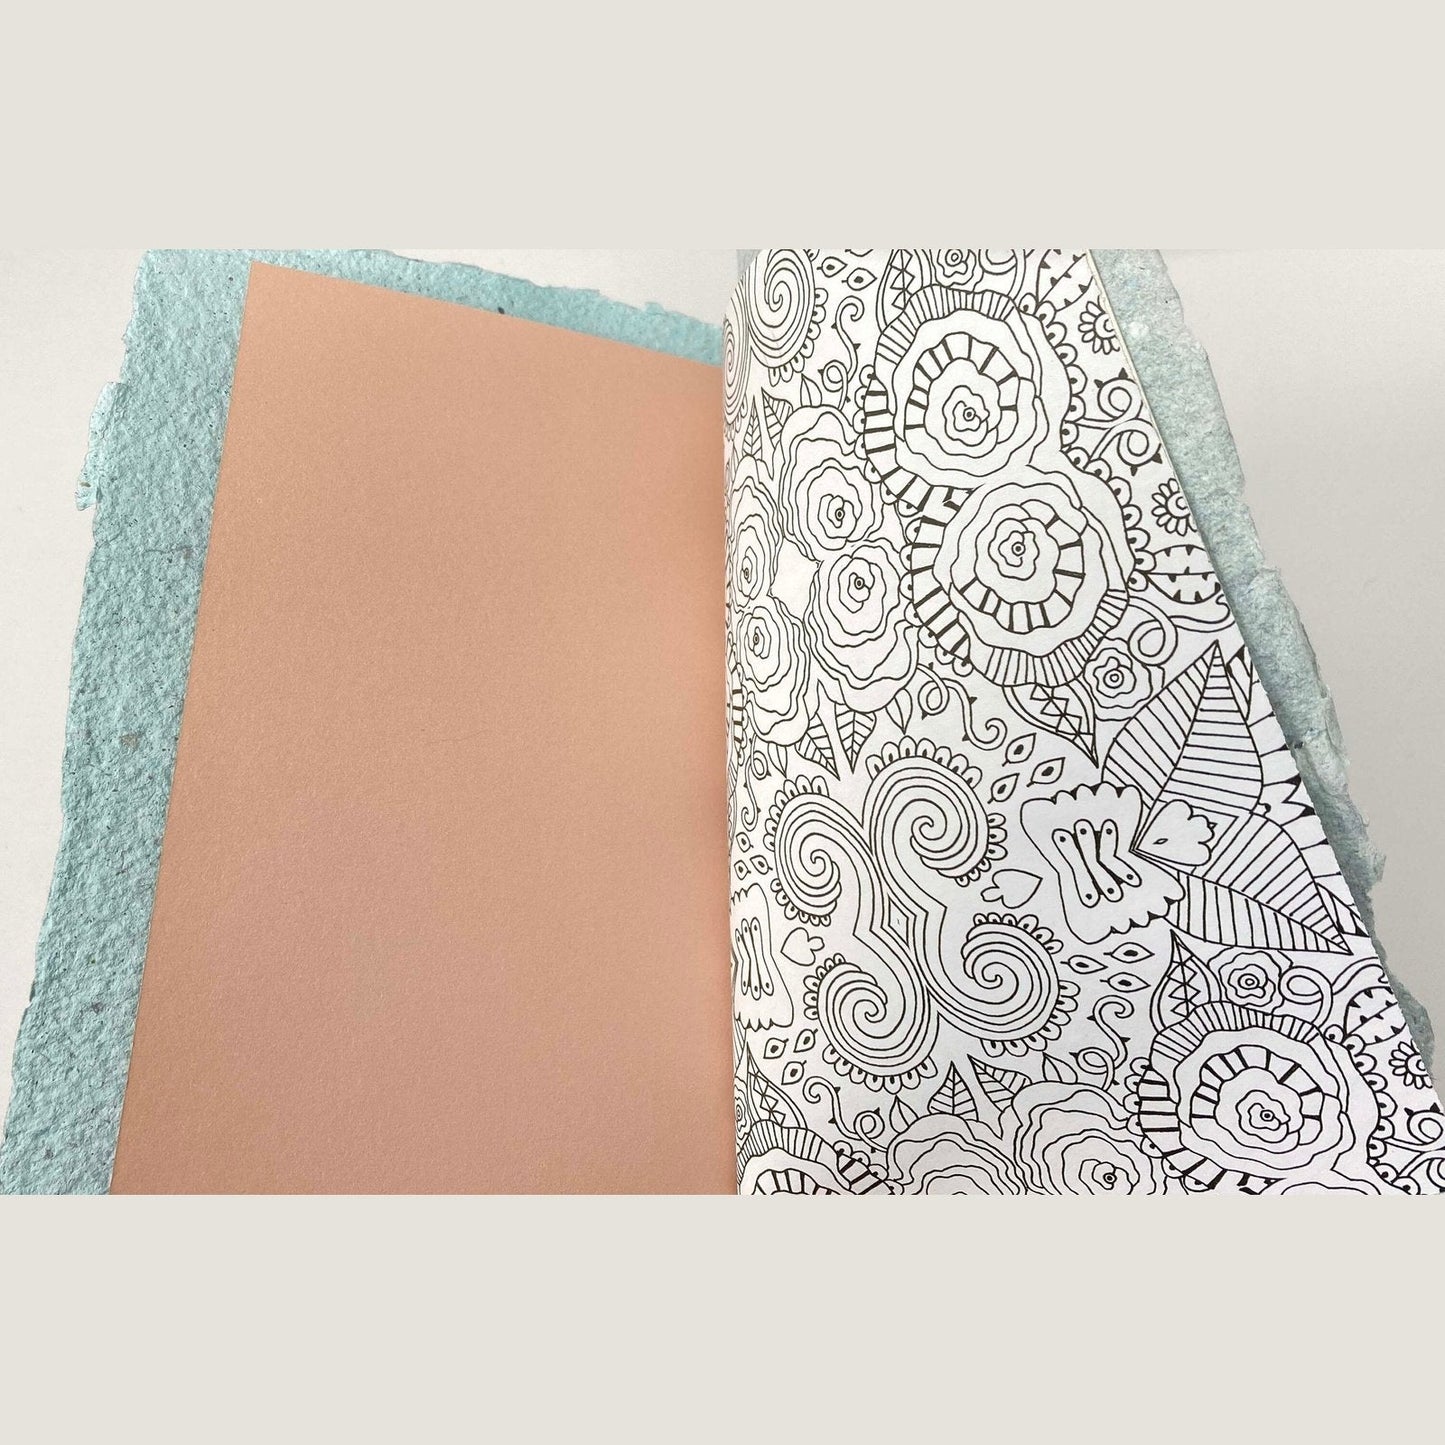 Art Journal with Handmade Paper Cover, Variety of Mixed Media Pages, Hand Sewn Binding with Stick Inserted